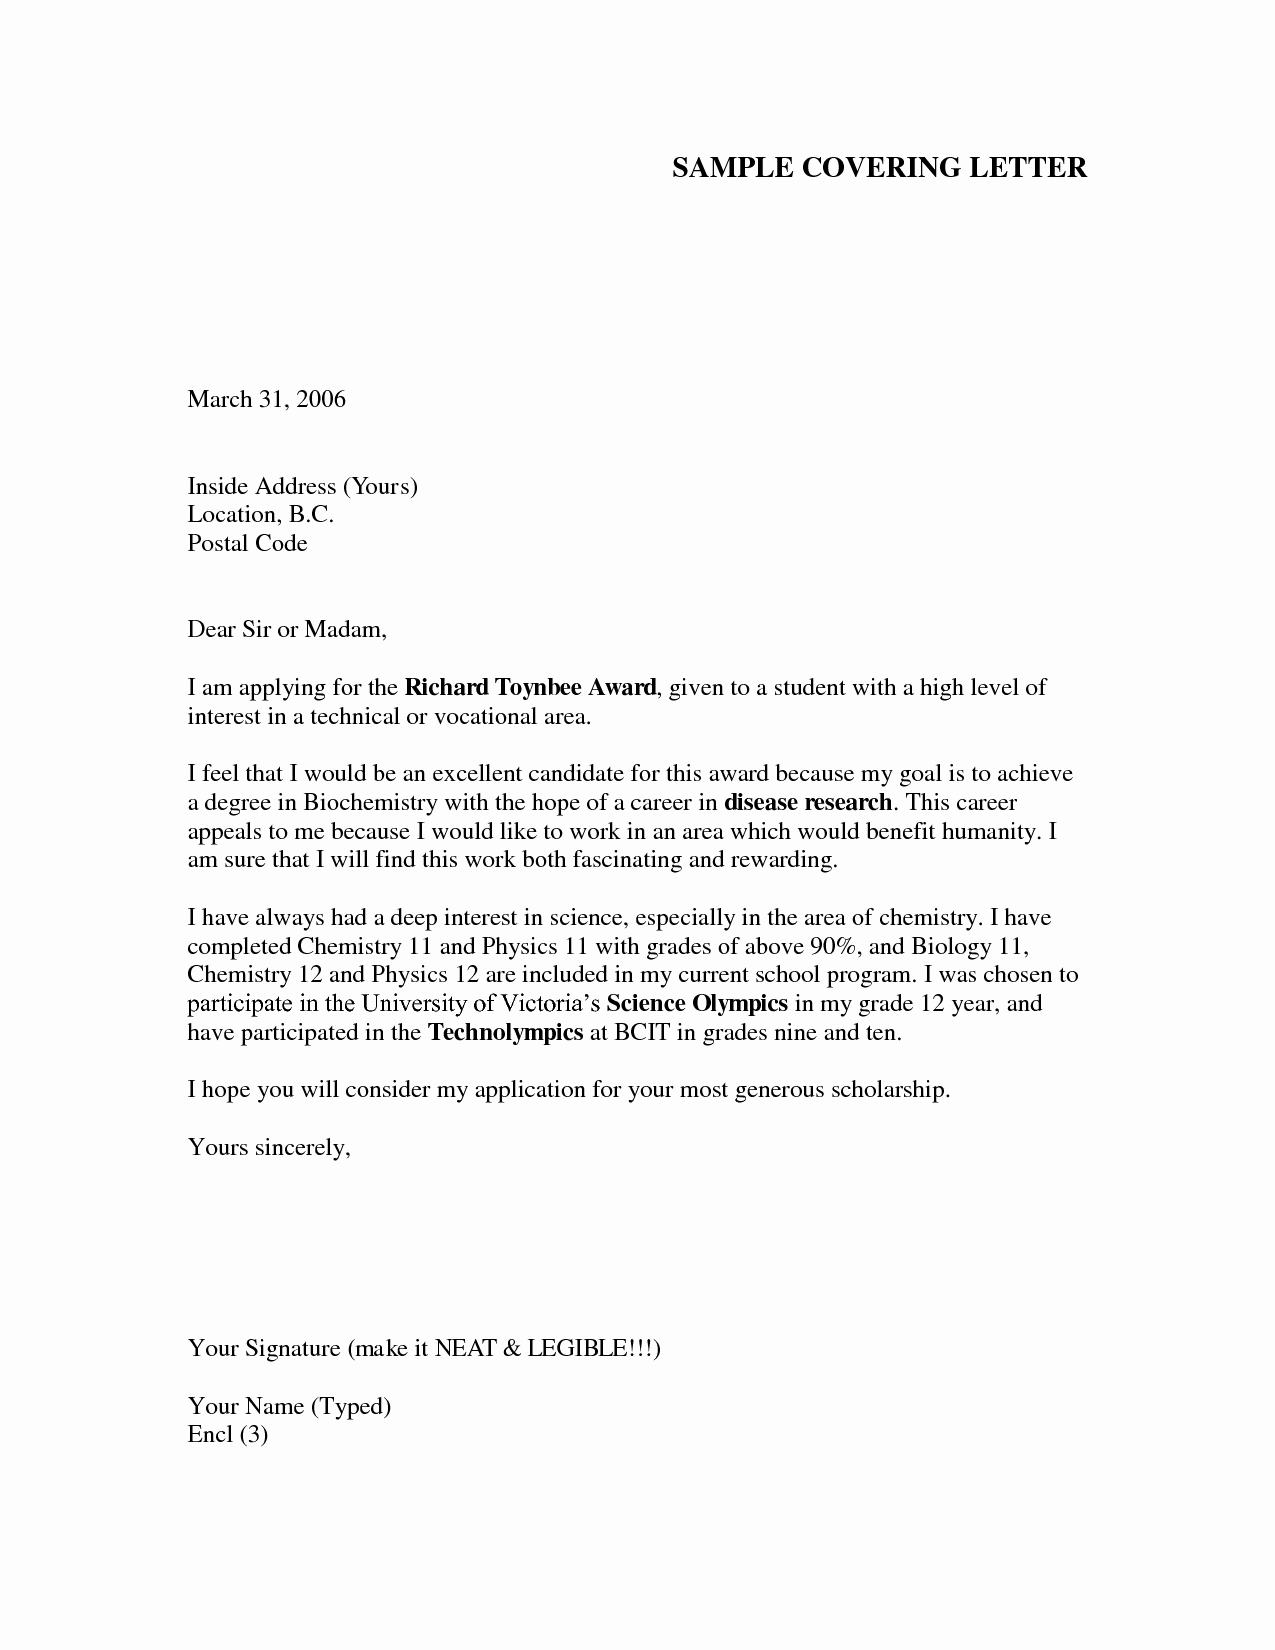 How to Cover Letter Template Elegant Cover Letter Samples How to Make It Perfect